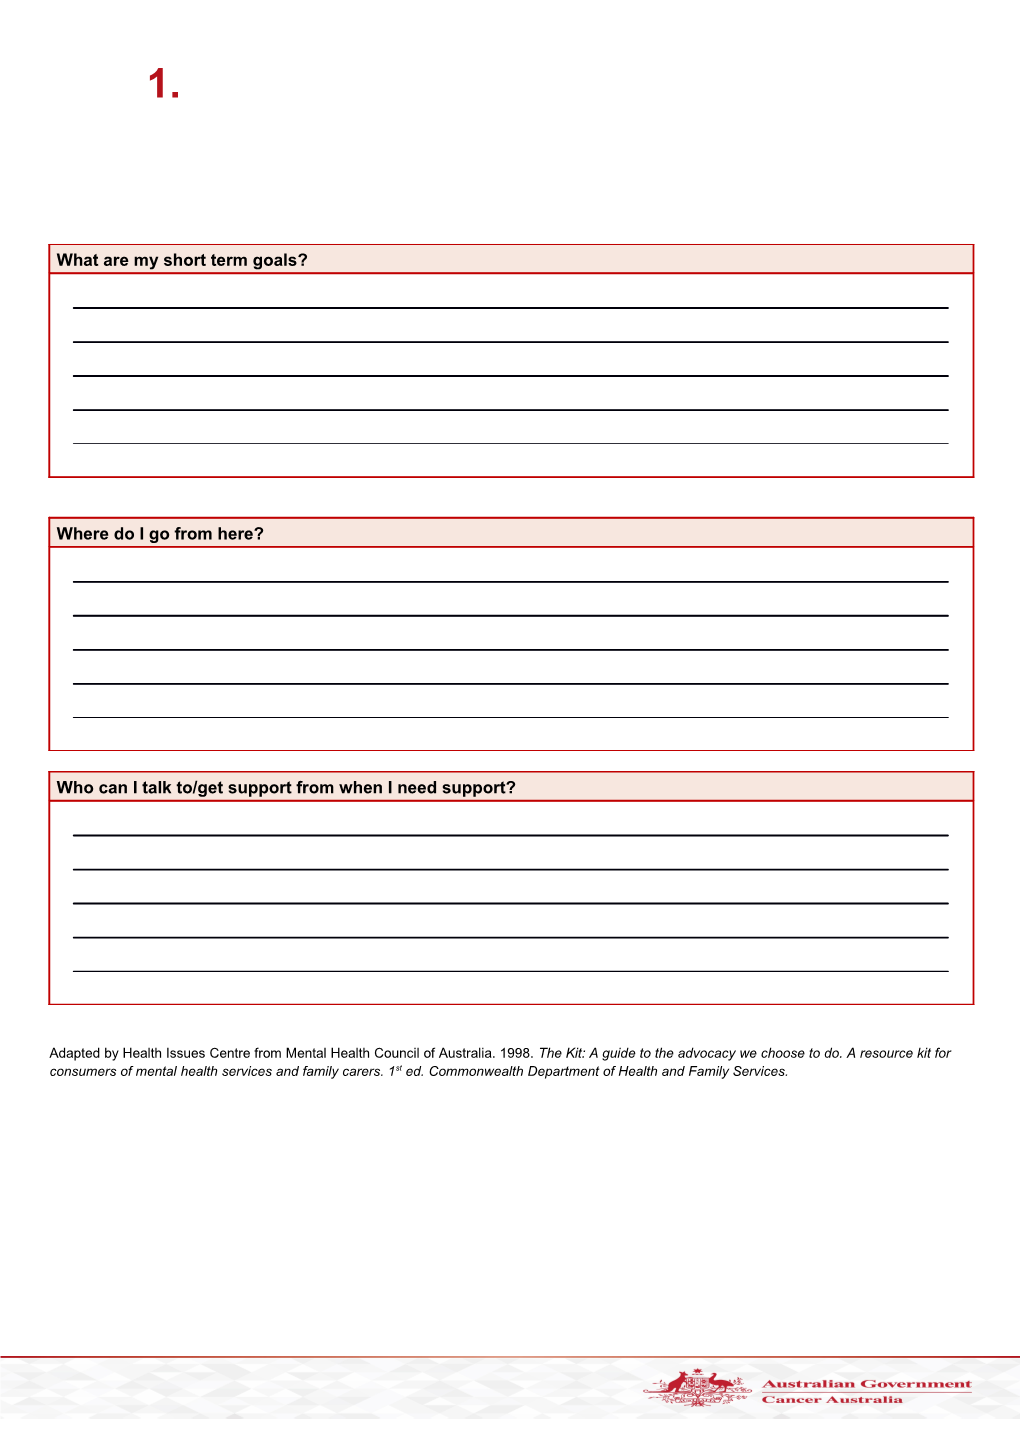 Use This Worksheet Periodically; Say, Once a Year Or Before a Major Advocacy Activity Comes Up